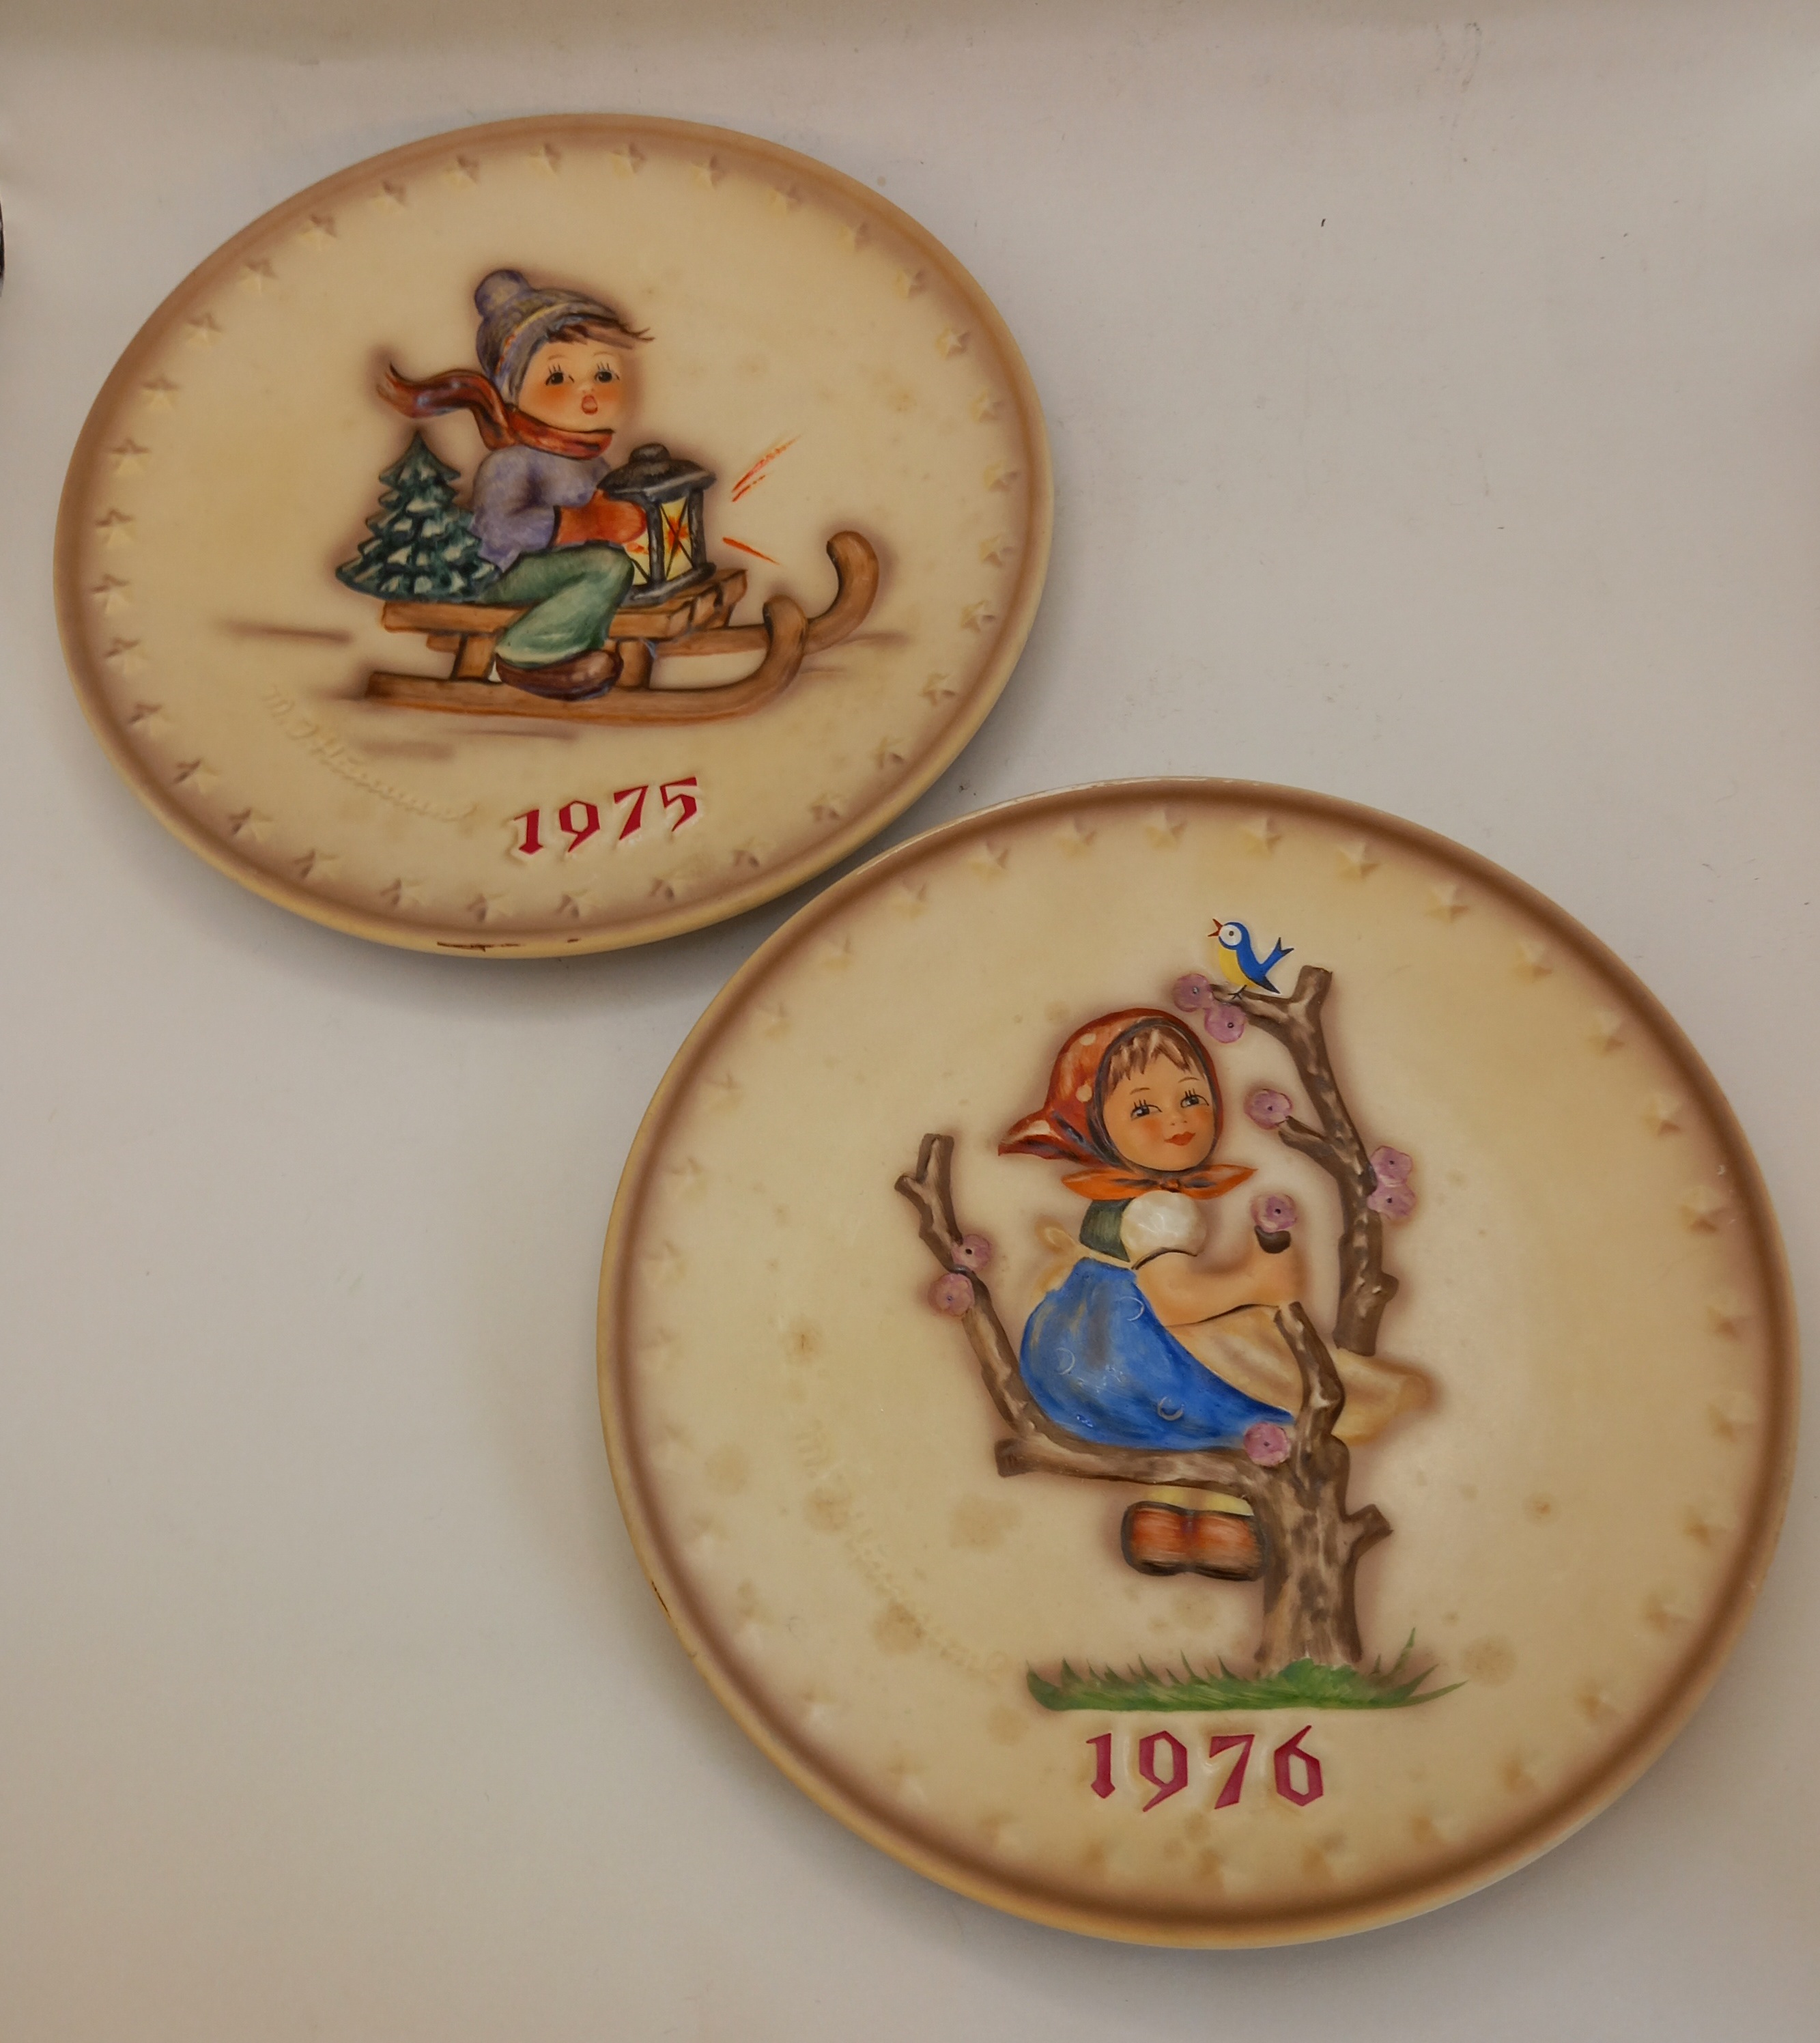 2 x Goebel plates - M J Hummel 5th Annual plate 1975, and 6th Annual plate 1976